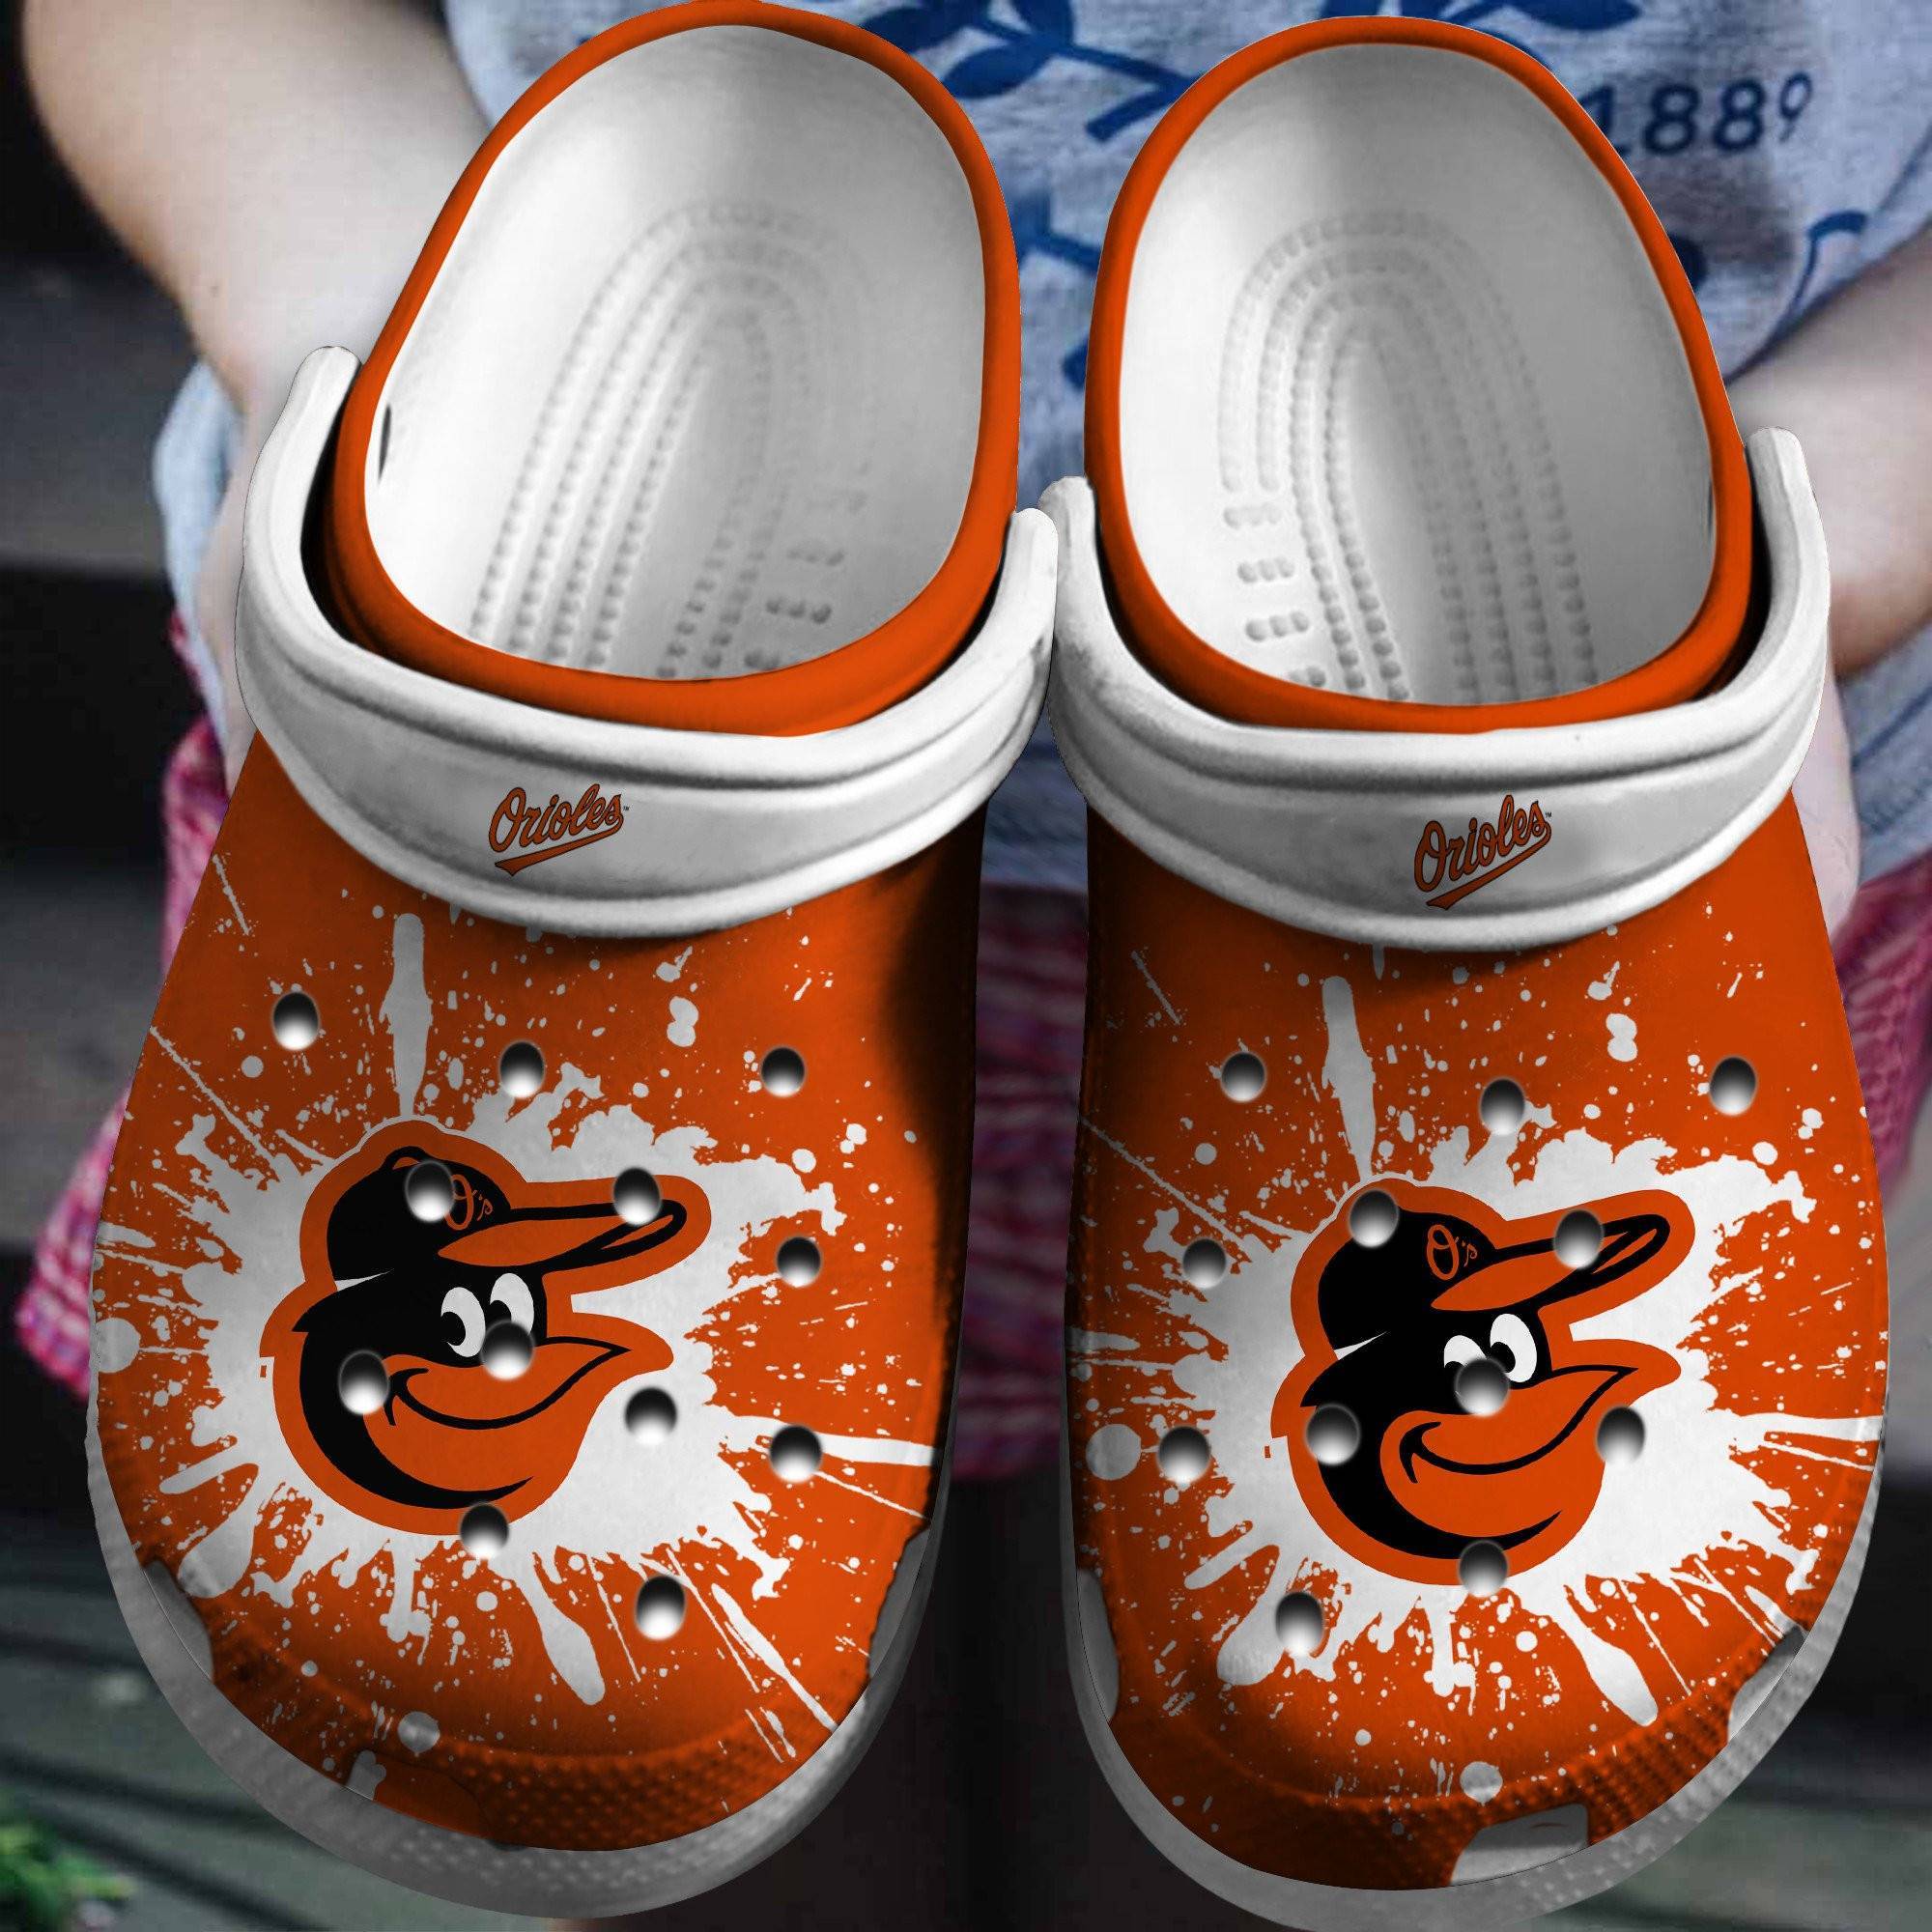 Hot Mlb Team Baltimore Orioles Orange – White Crocss Clog Shoesshoes Trusted Shopping Online In The World